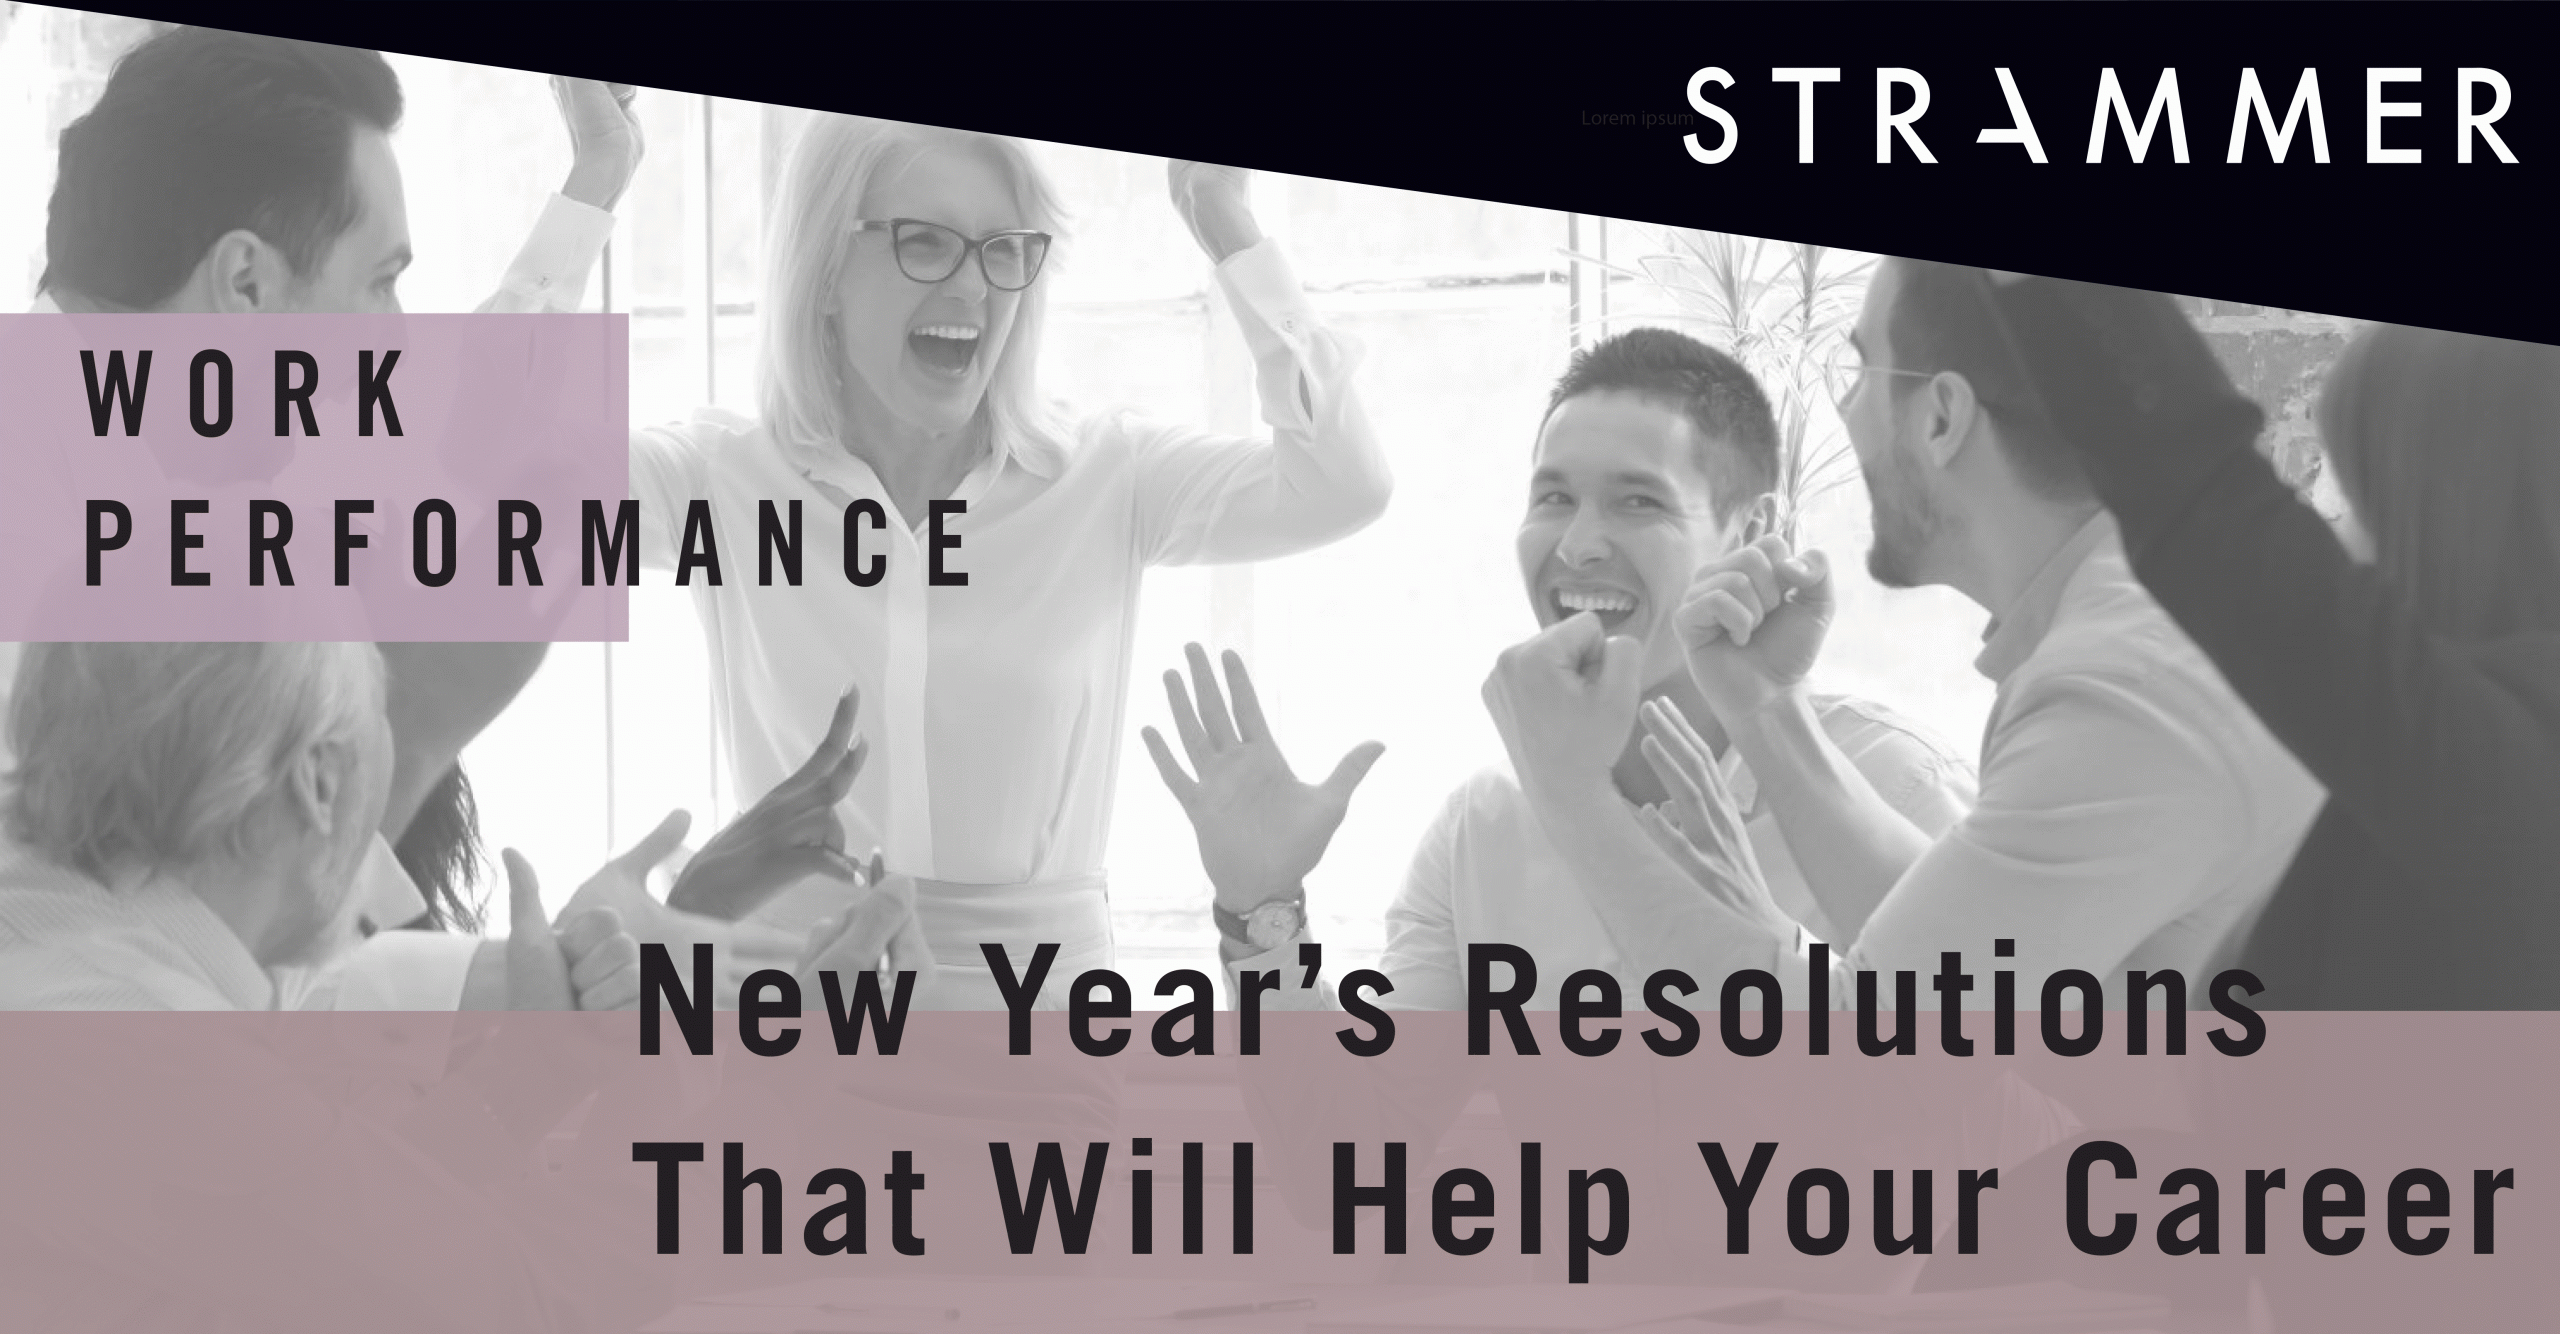 New Year’s Resolutions For Your Career